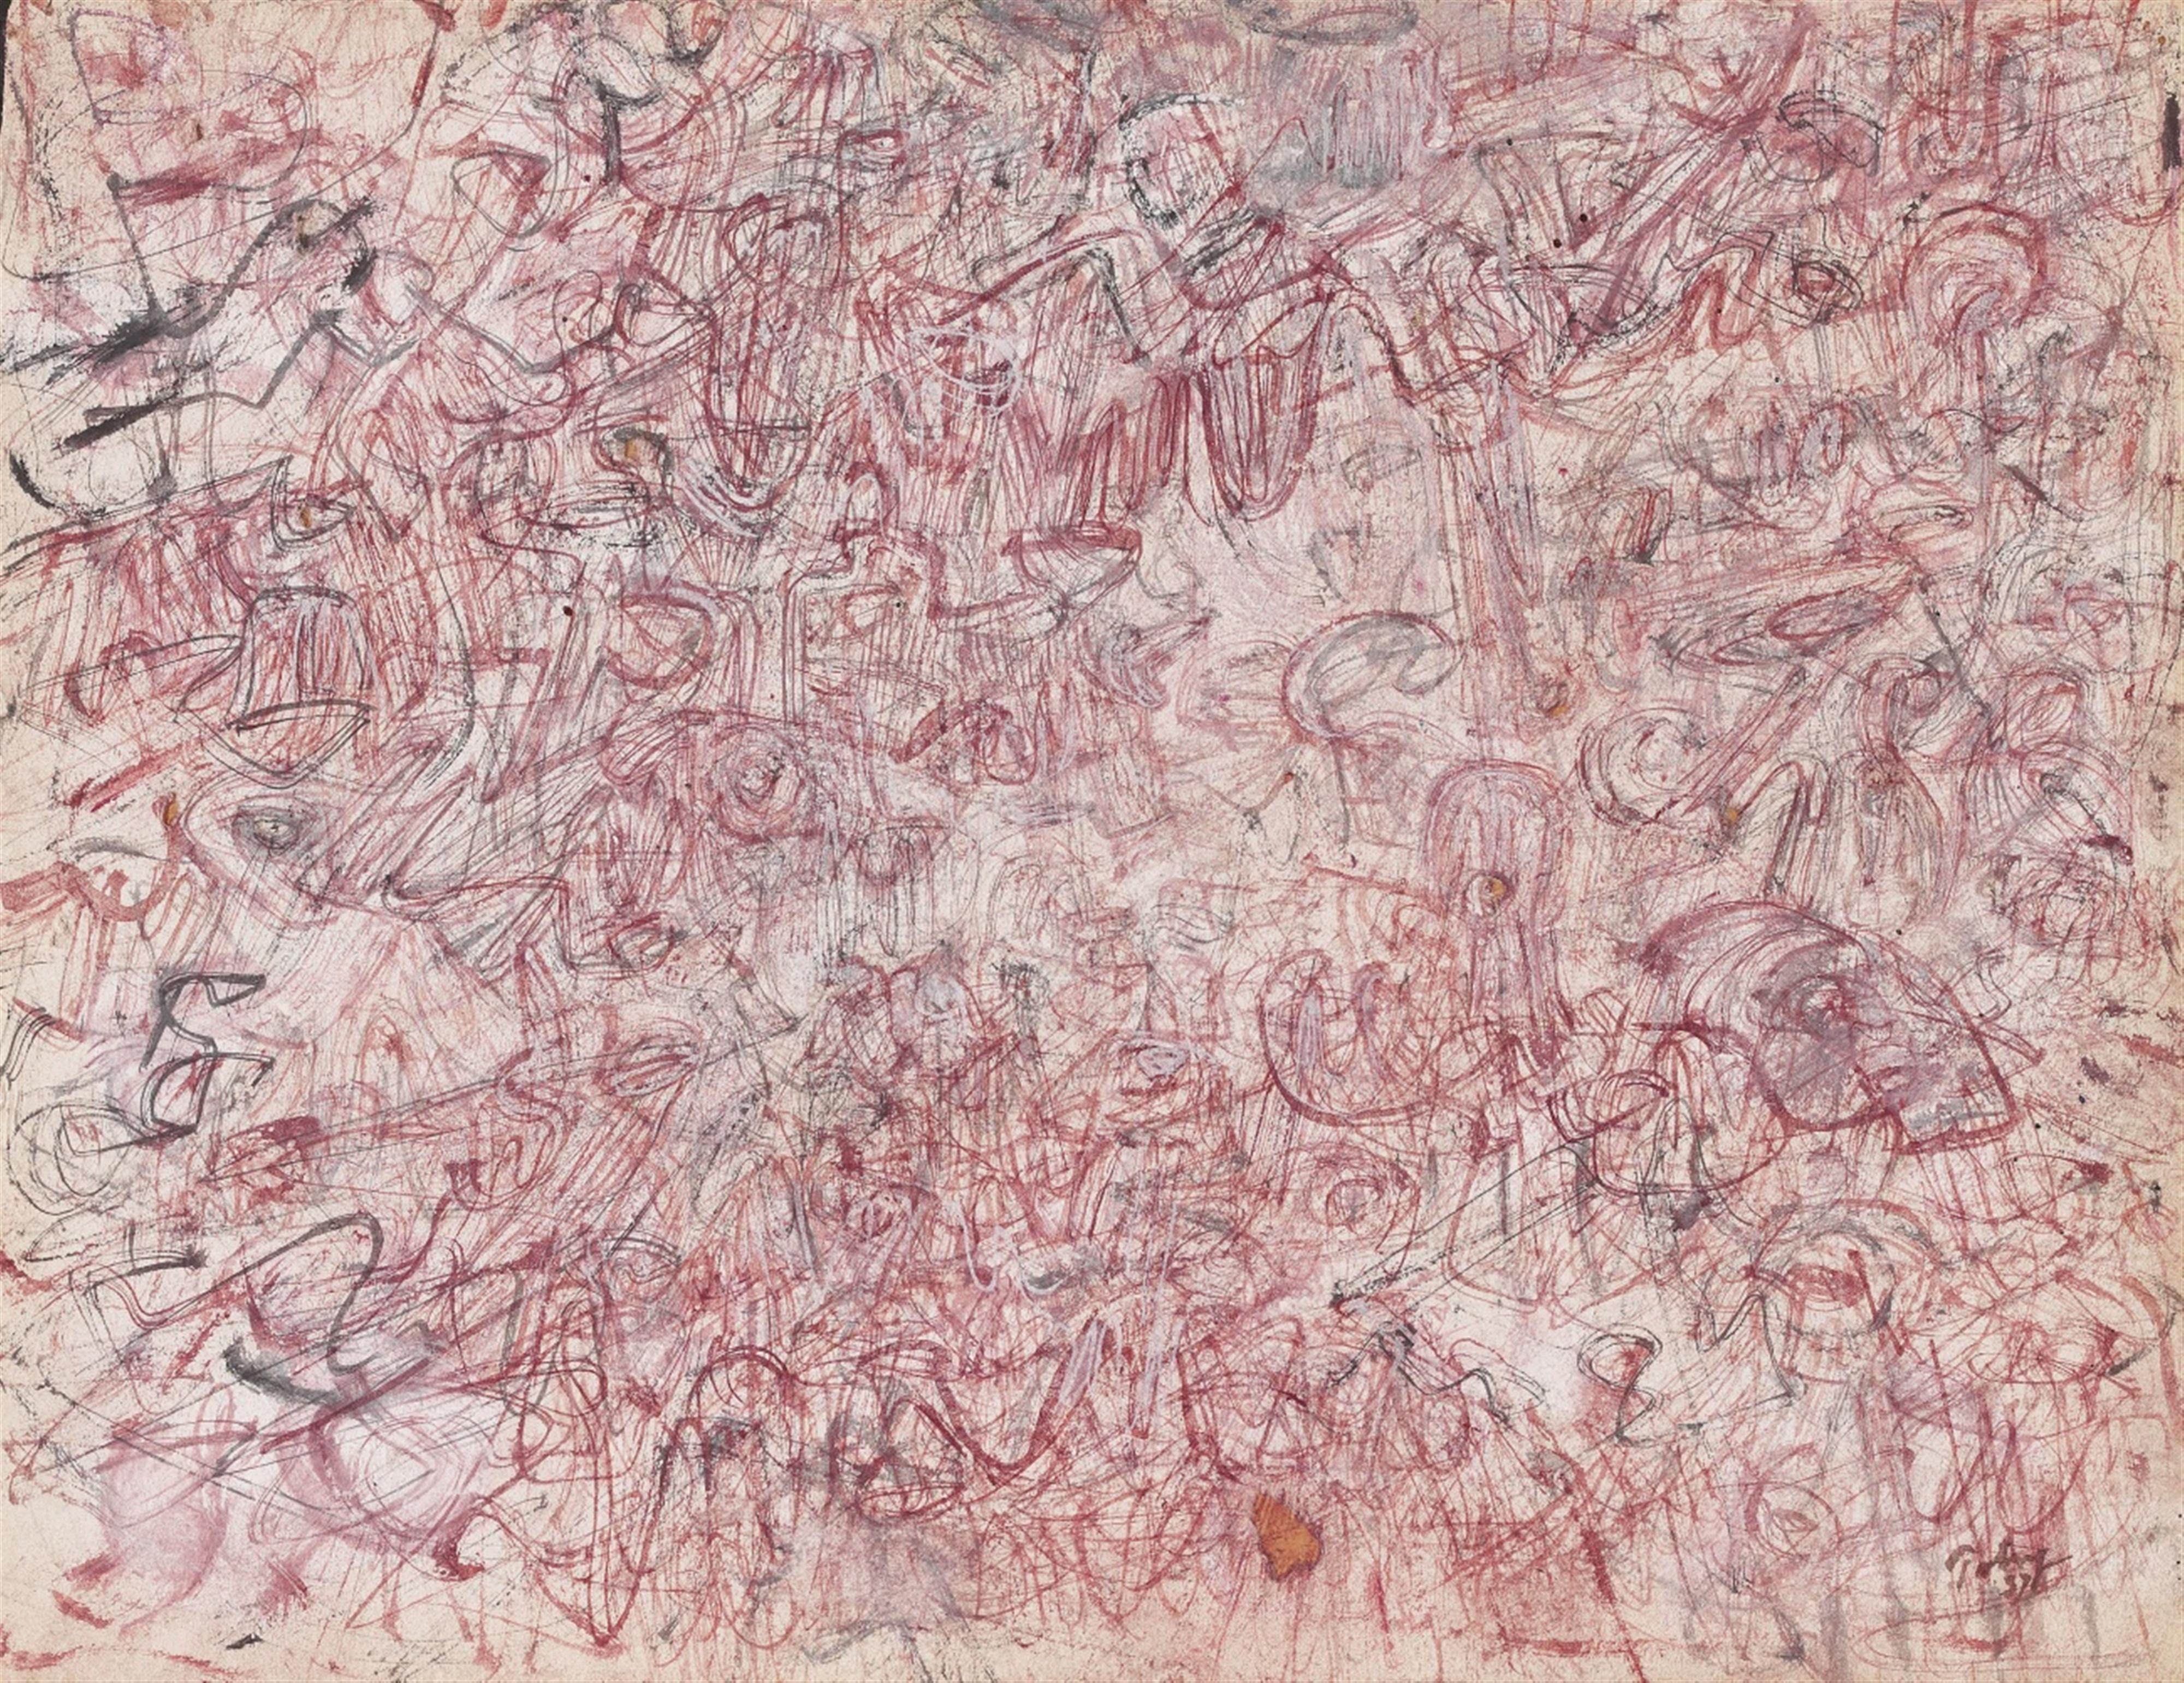 Mark Tobey - Extension from Bagdad II - image-1